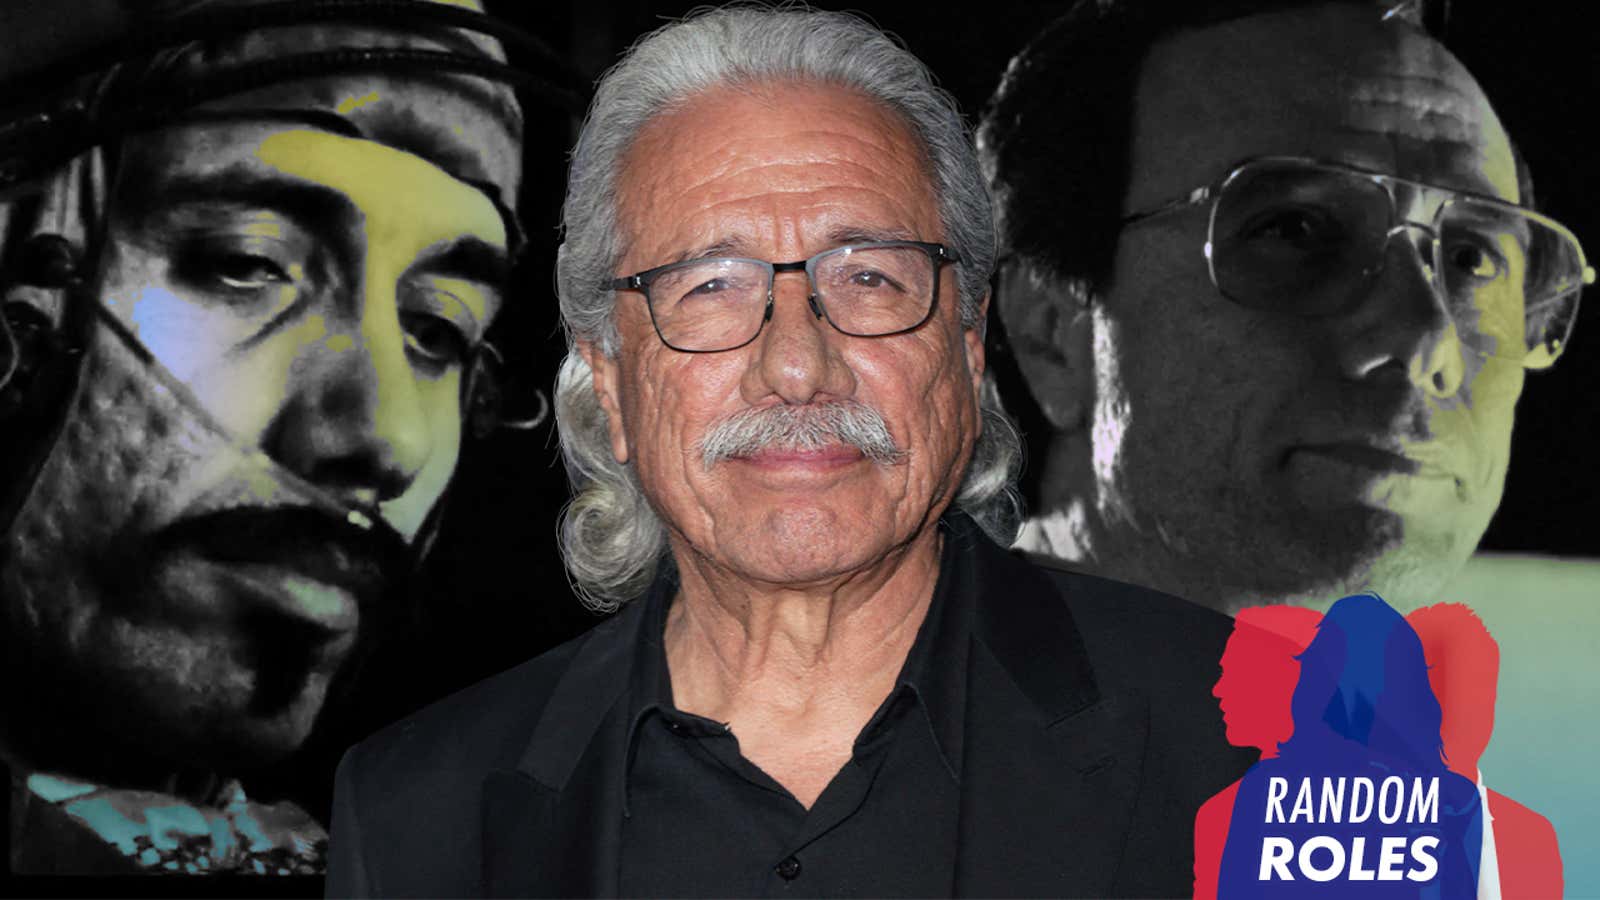 From left: Edward James Olmos in Blade Runner (Screenshot), at the 2019 Los Angeles Latino International Film Festival (Photo: JC Olivera/Getty Images), and in Selena (Screenshot)